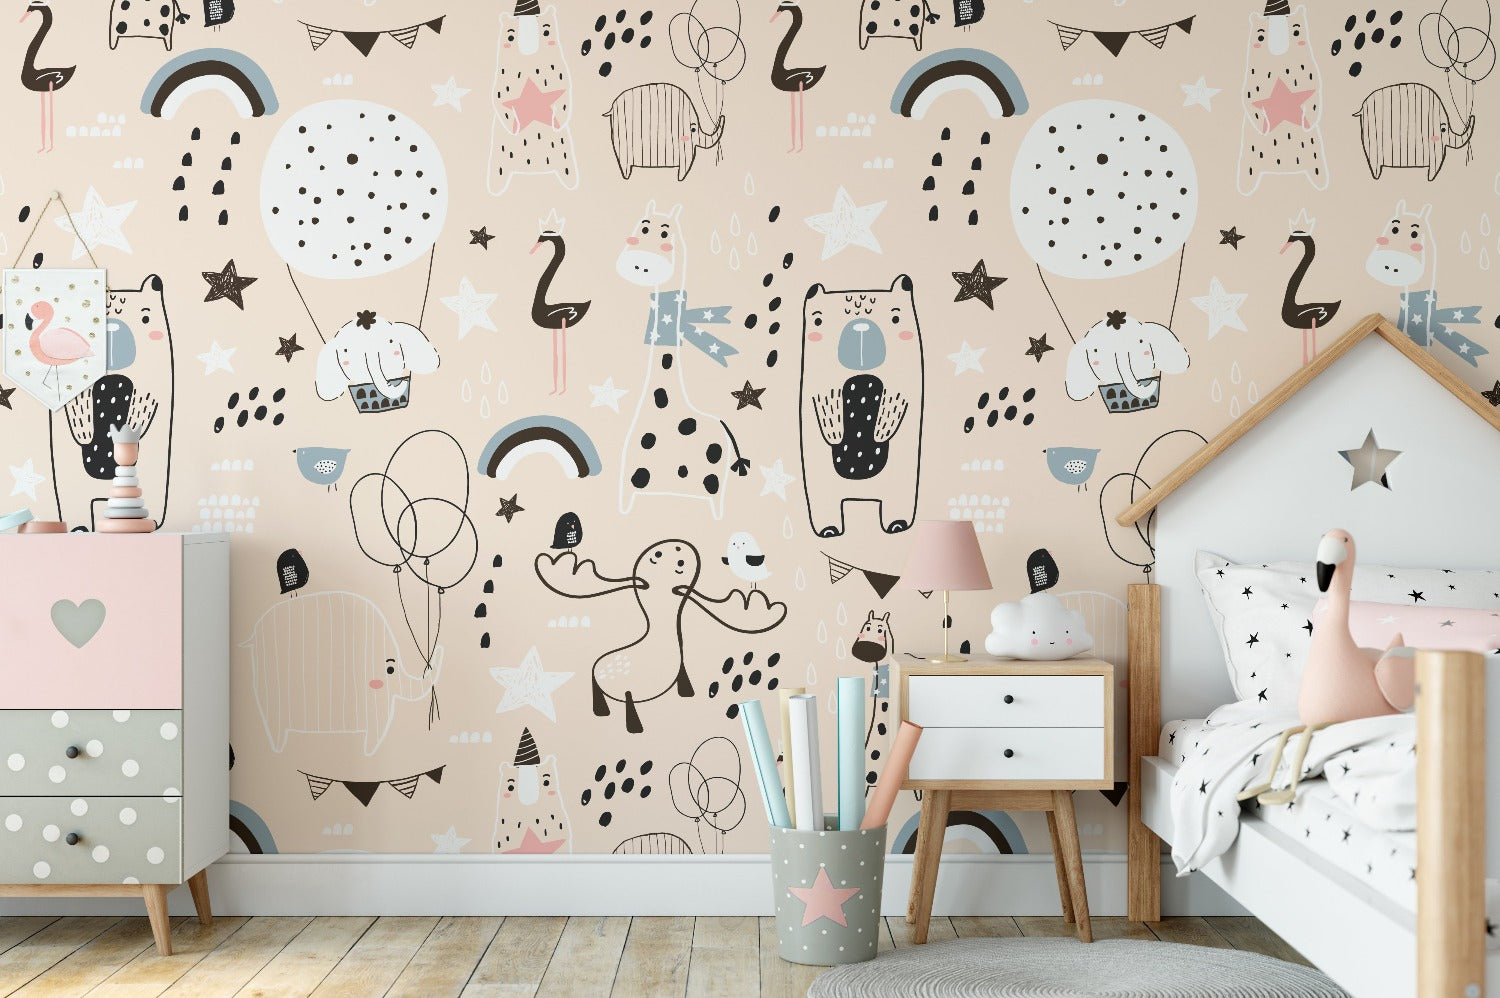 Full view of a child’s bedroom wall decorated with Timberlea Interiors animal doodle wallpaper, showing a seamless pattern integration in a cozy room setting."